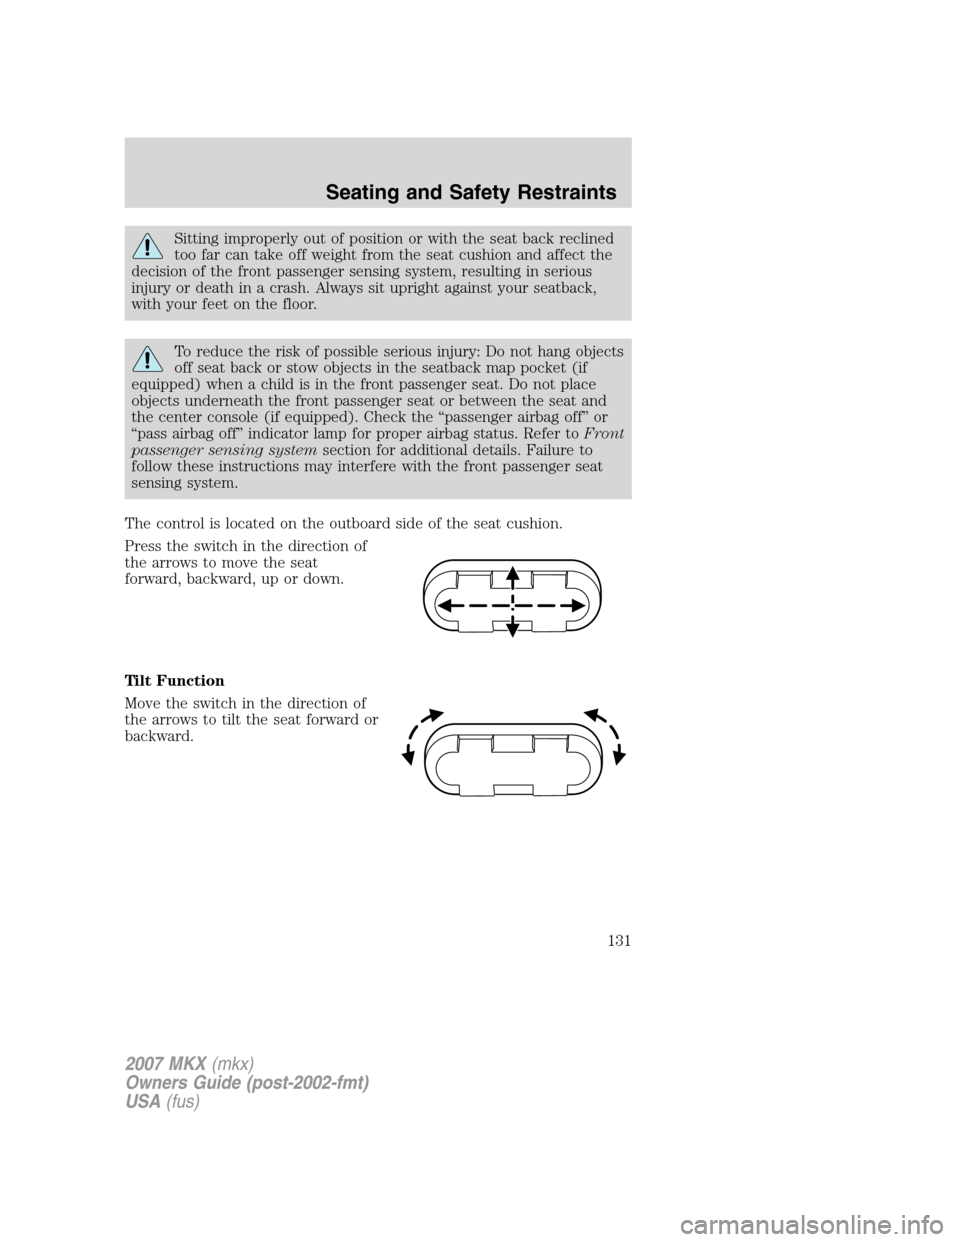 LINCOLN MKX 2007  Owners Manual Sitting improperly out of position or with the seat back reclined
too far can take off weight from the seat cushion and affect the
decision of the front passenger sensing system, resulting in serious
